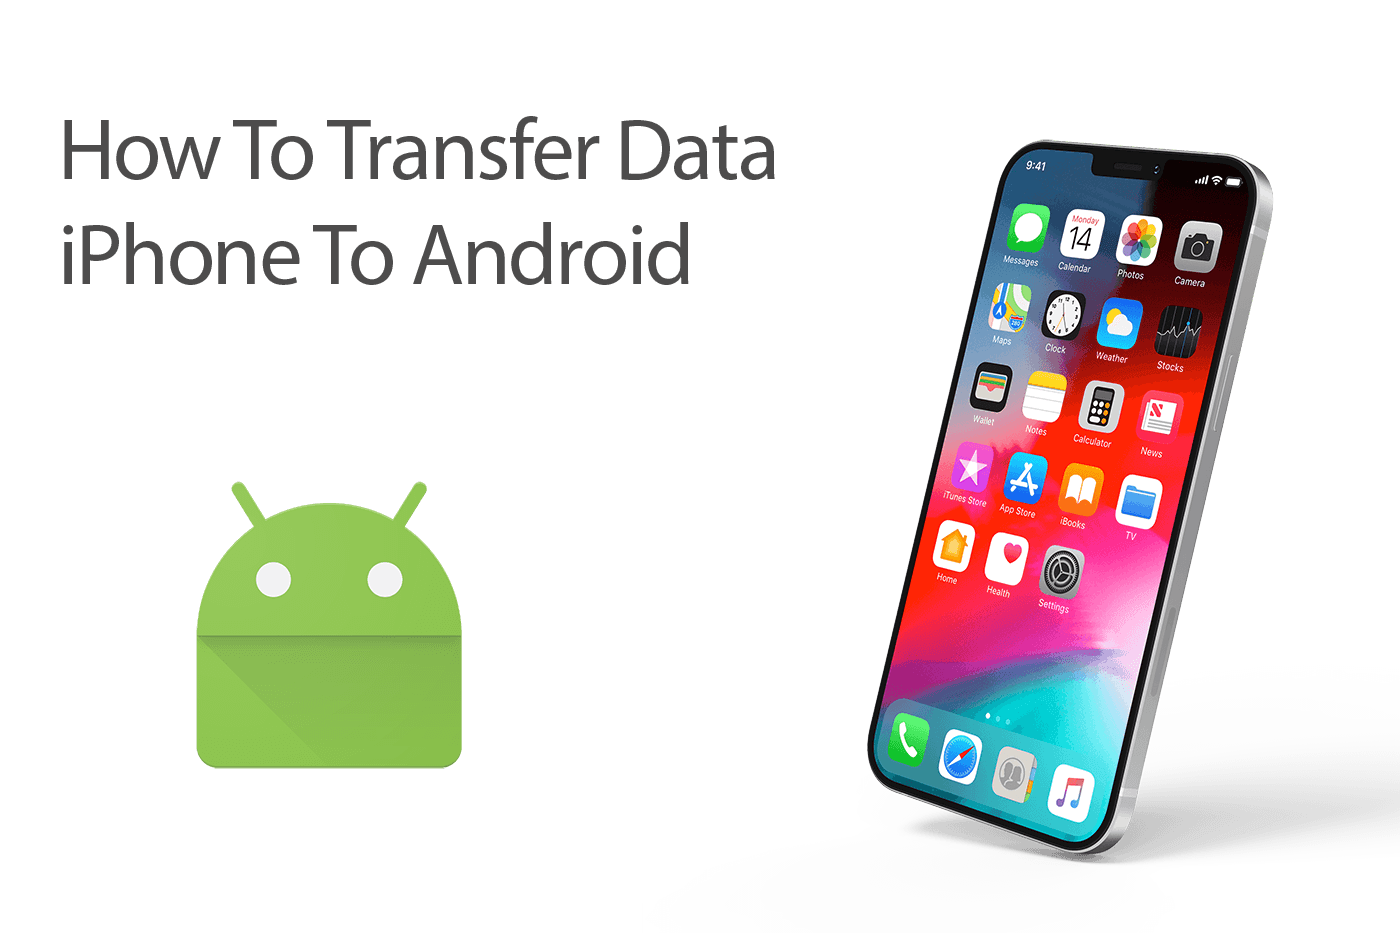 How To Transfer Data from iPhone To Android Without Computer